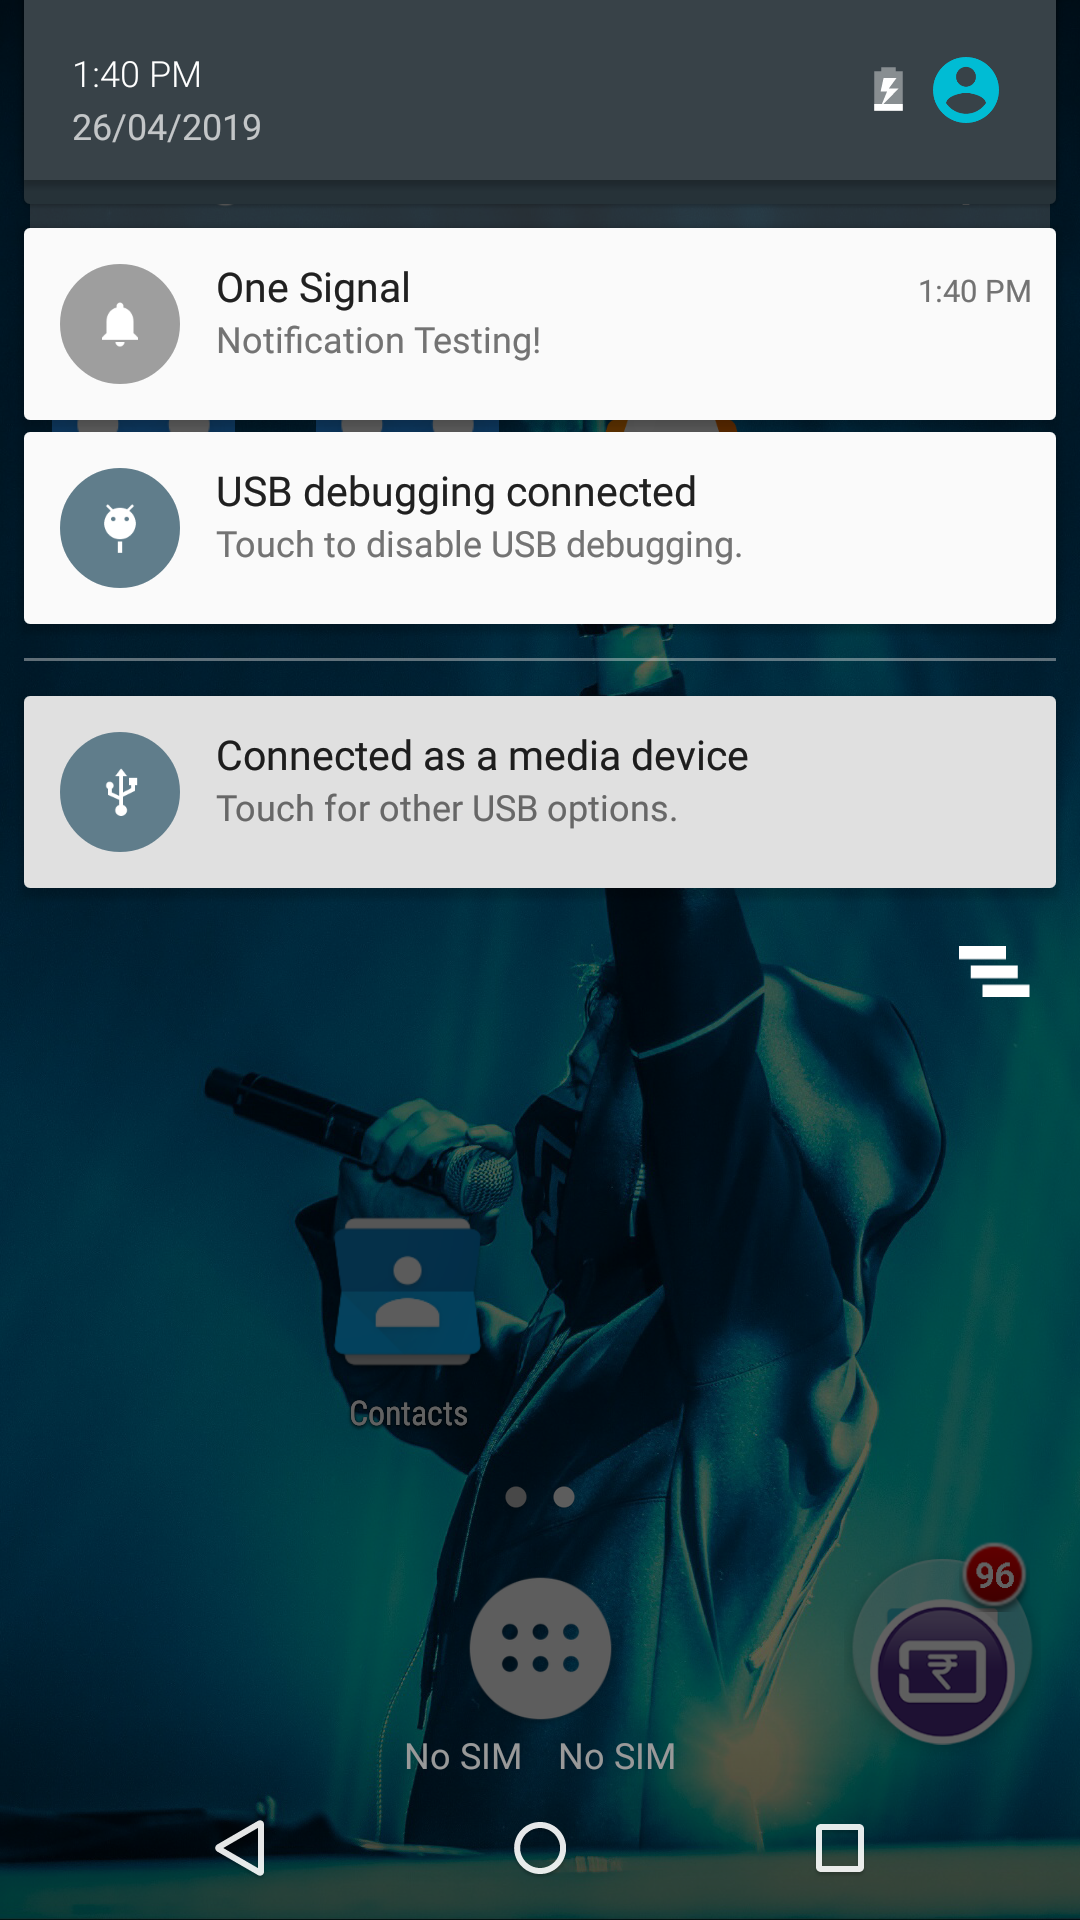 One signal Android push notification example